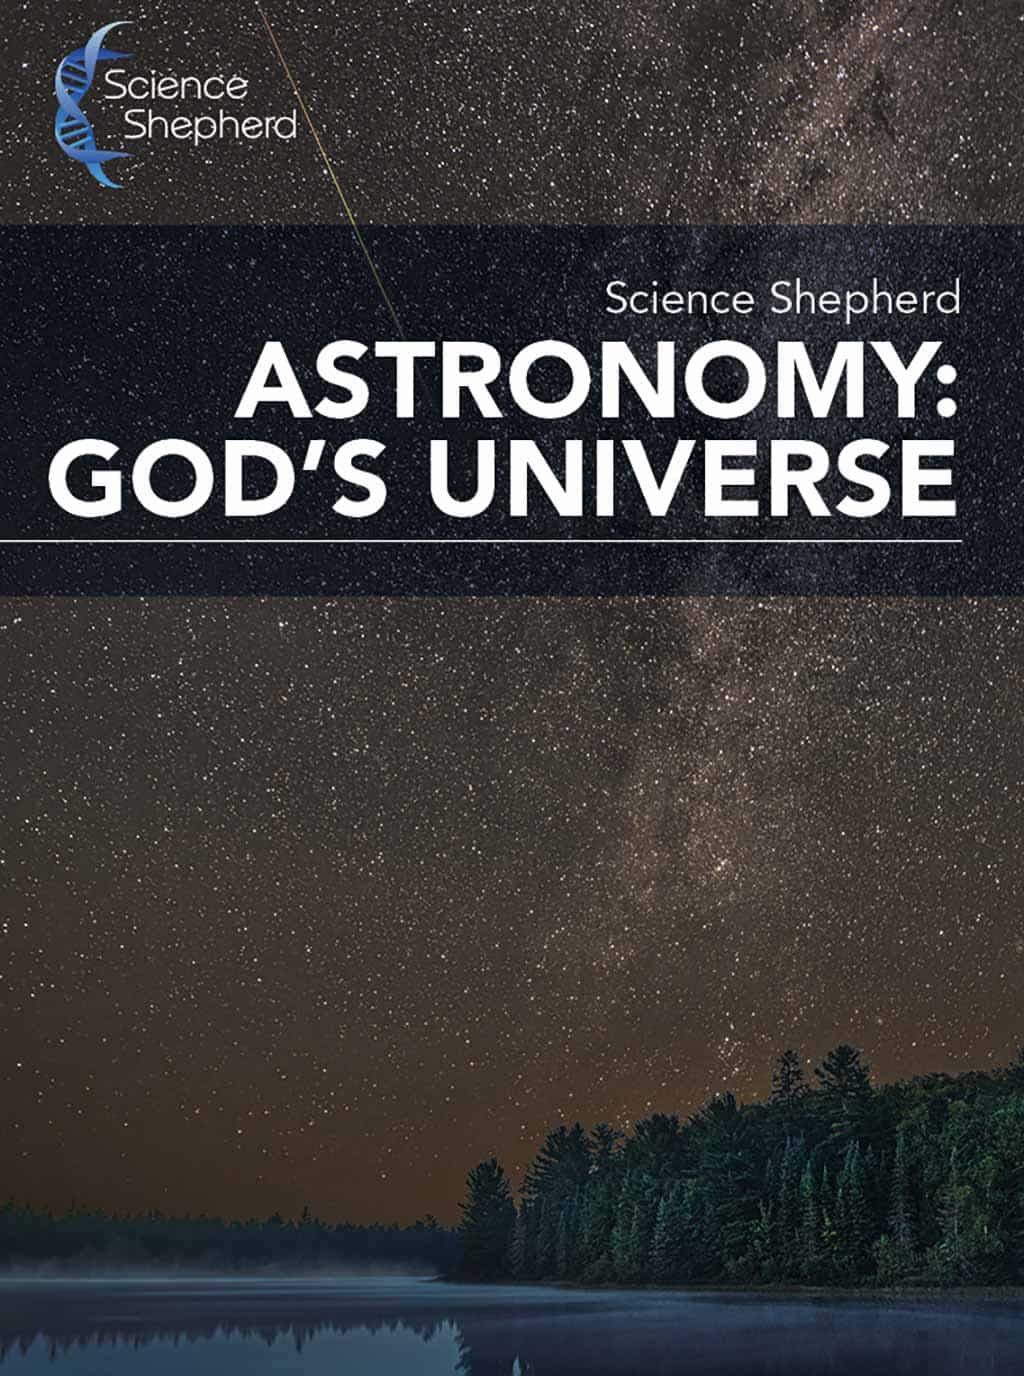 Cover for Science Shepherd's homeschool astronomy curriculum of the night sky and a lake